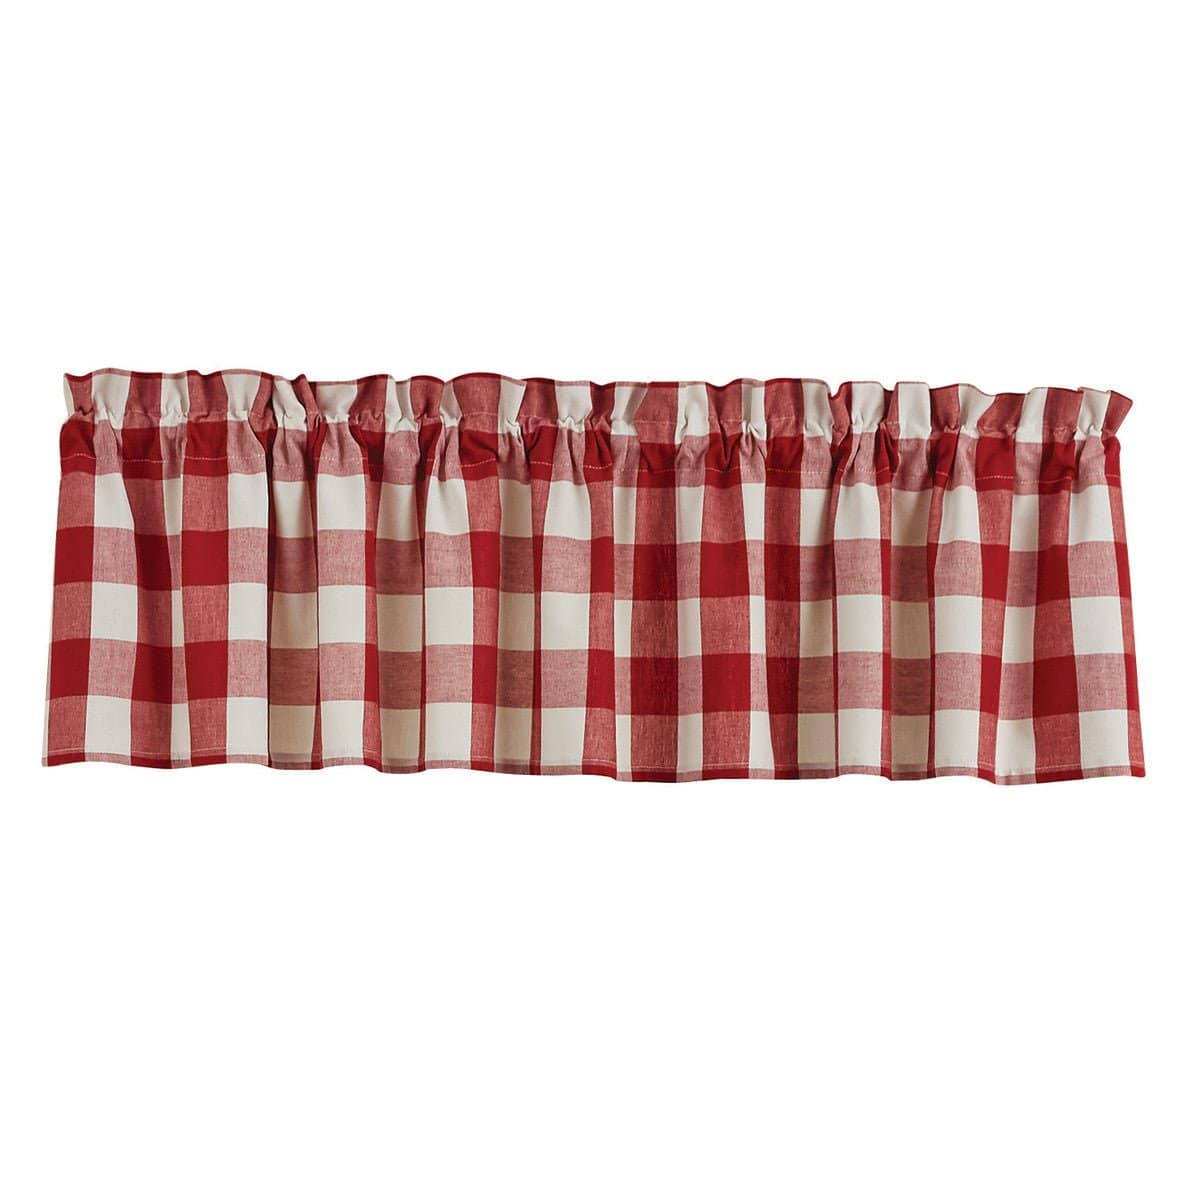 Wicklow Check in Red Valance Unlined-Park Designs-The Village Merchant